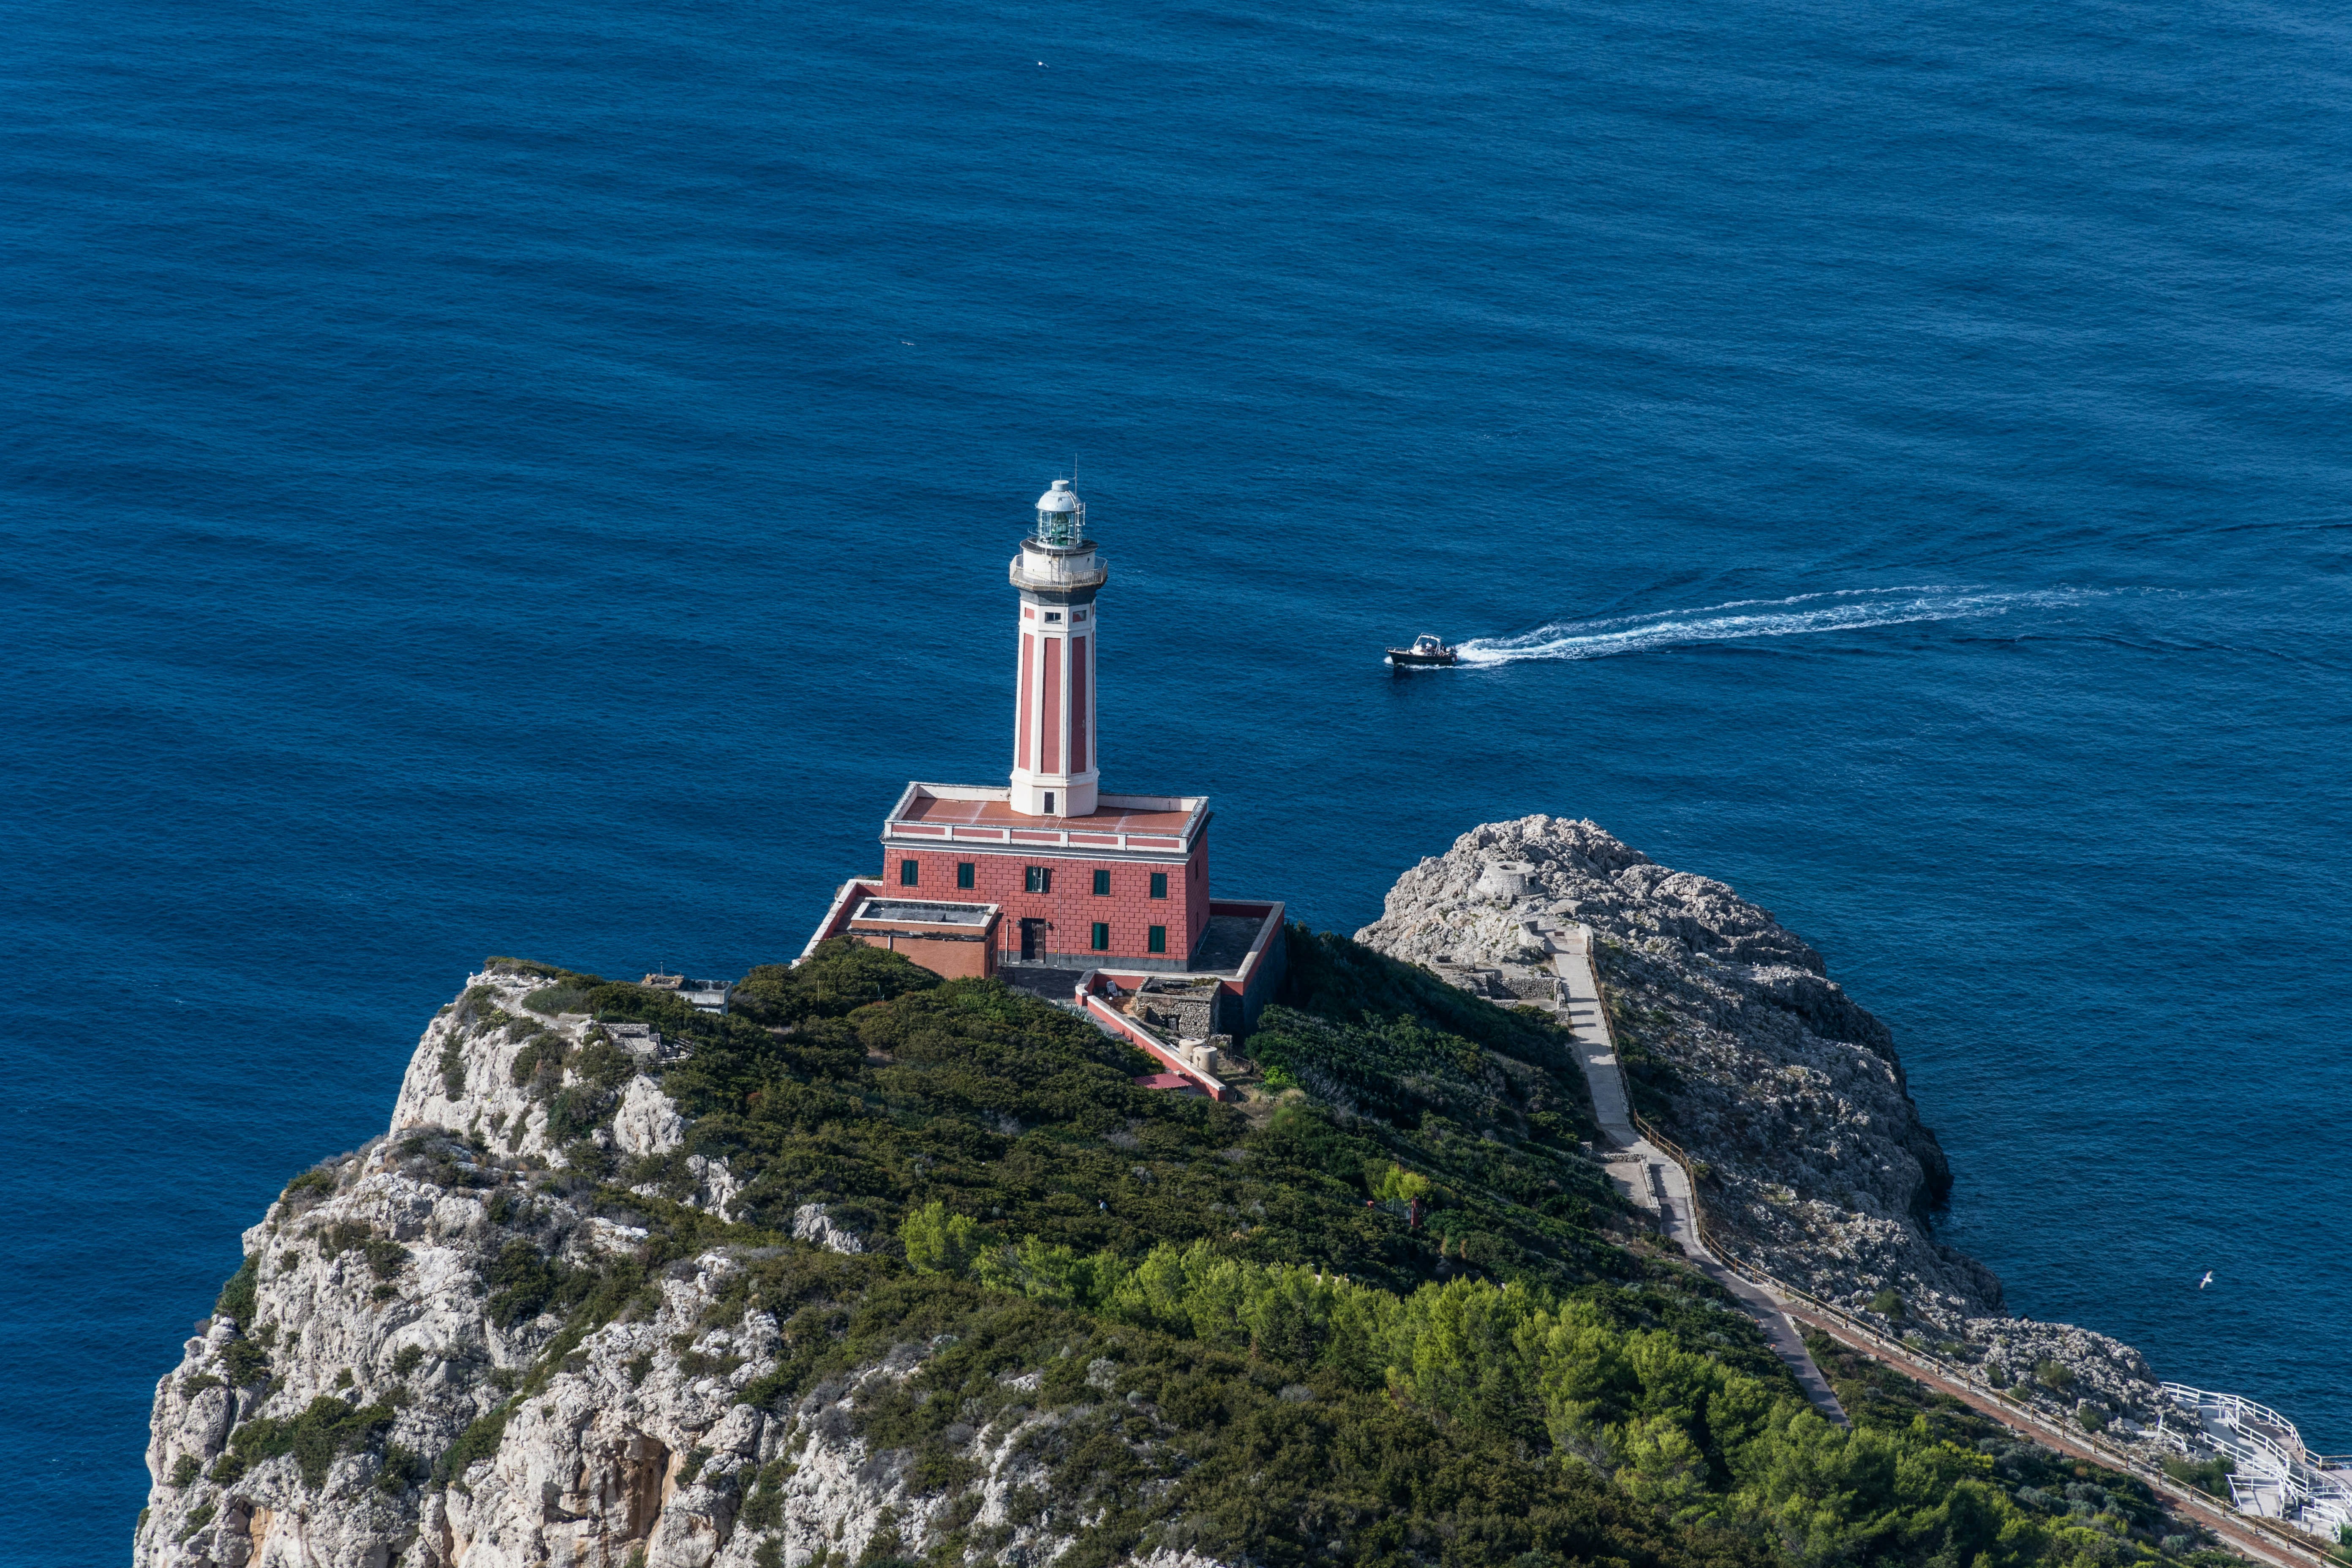 Punta Carena Lighthouse is an active lighthouse, located on the island of Capri, about 3 kilometers southwest of Anacapri, Italy.